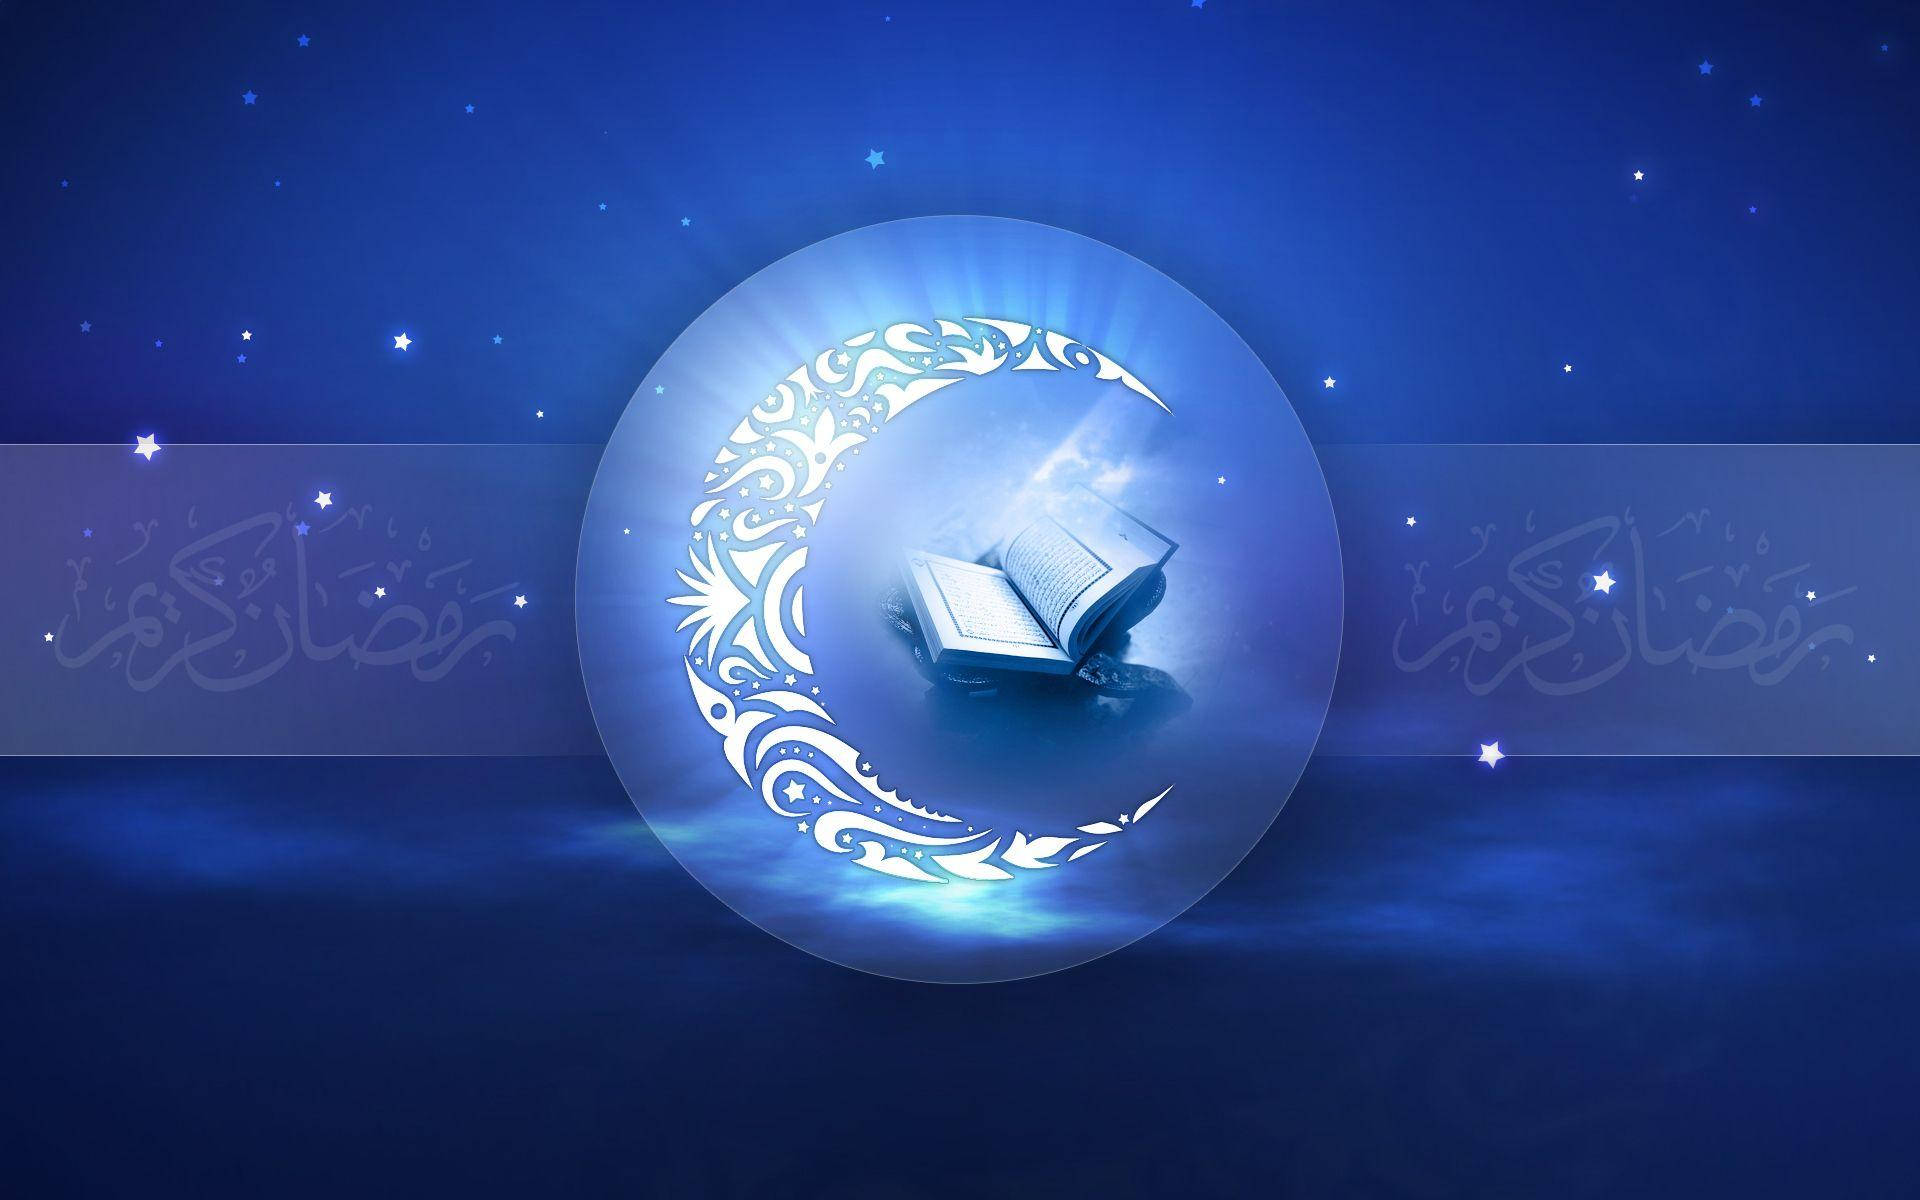 Ramadan With Crescent Moon And Quran Background